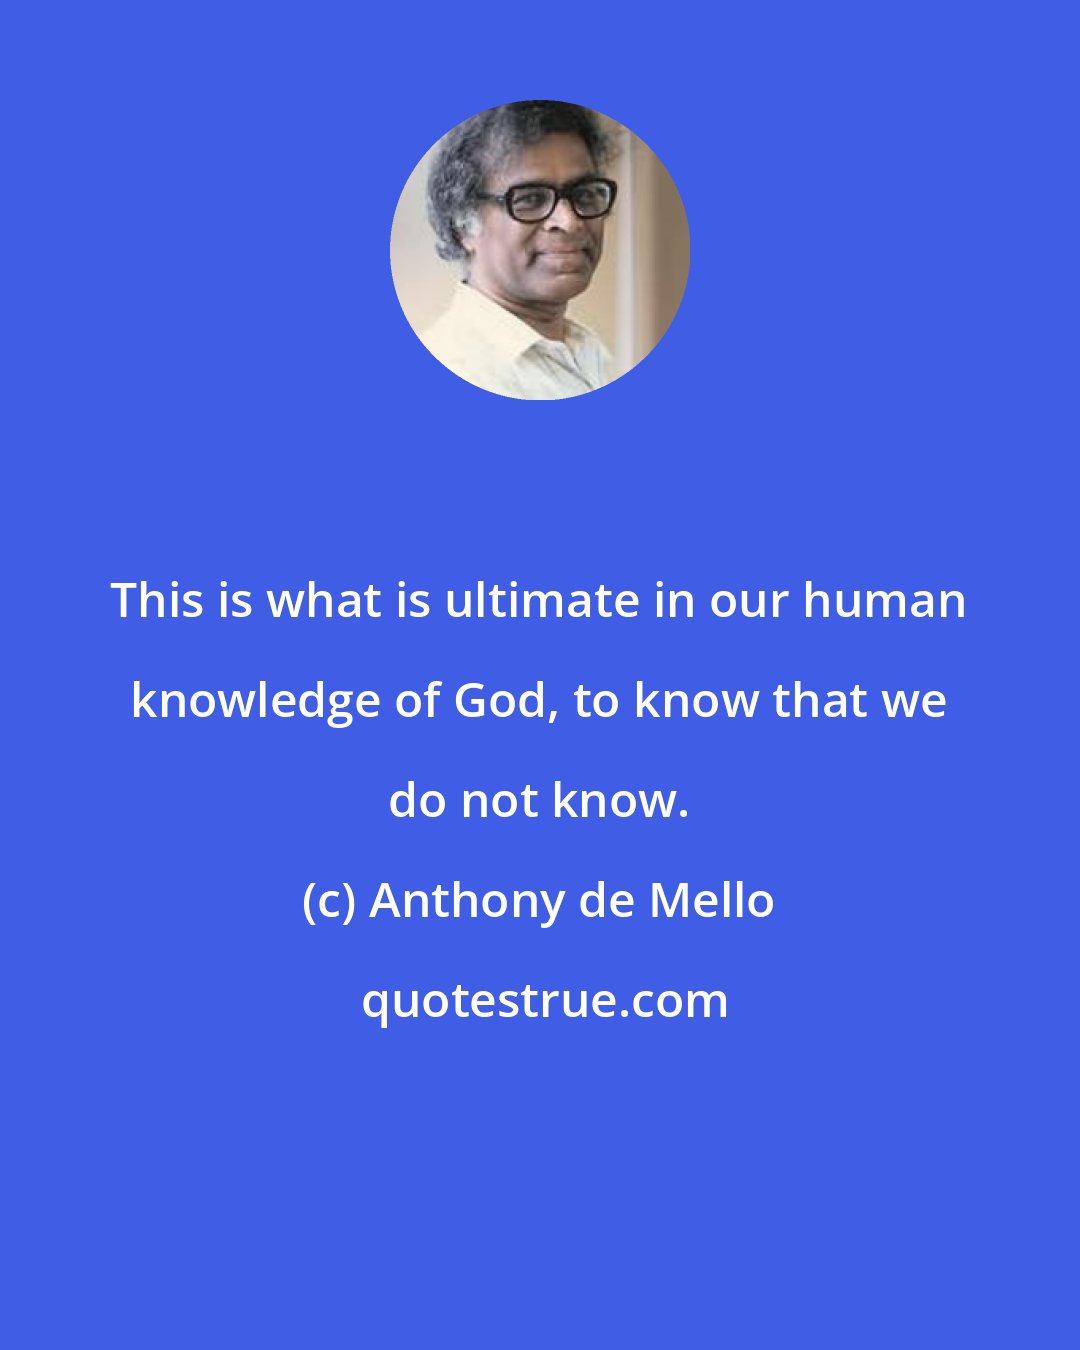 Anthony de Mello: This is what is ultimate in our human knowledge of God, to know that we do not know.